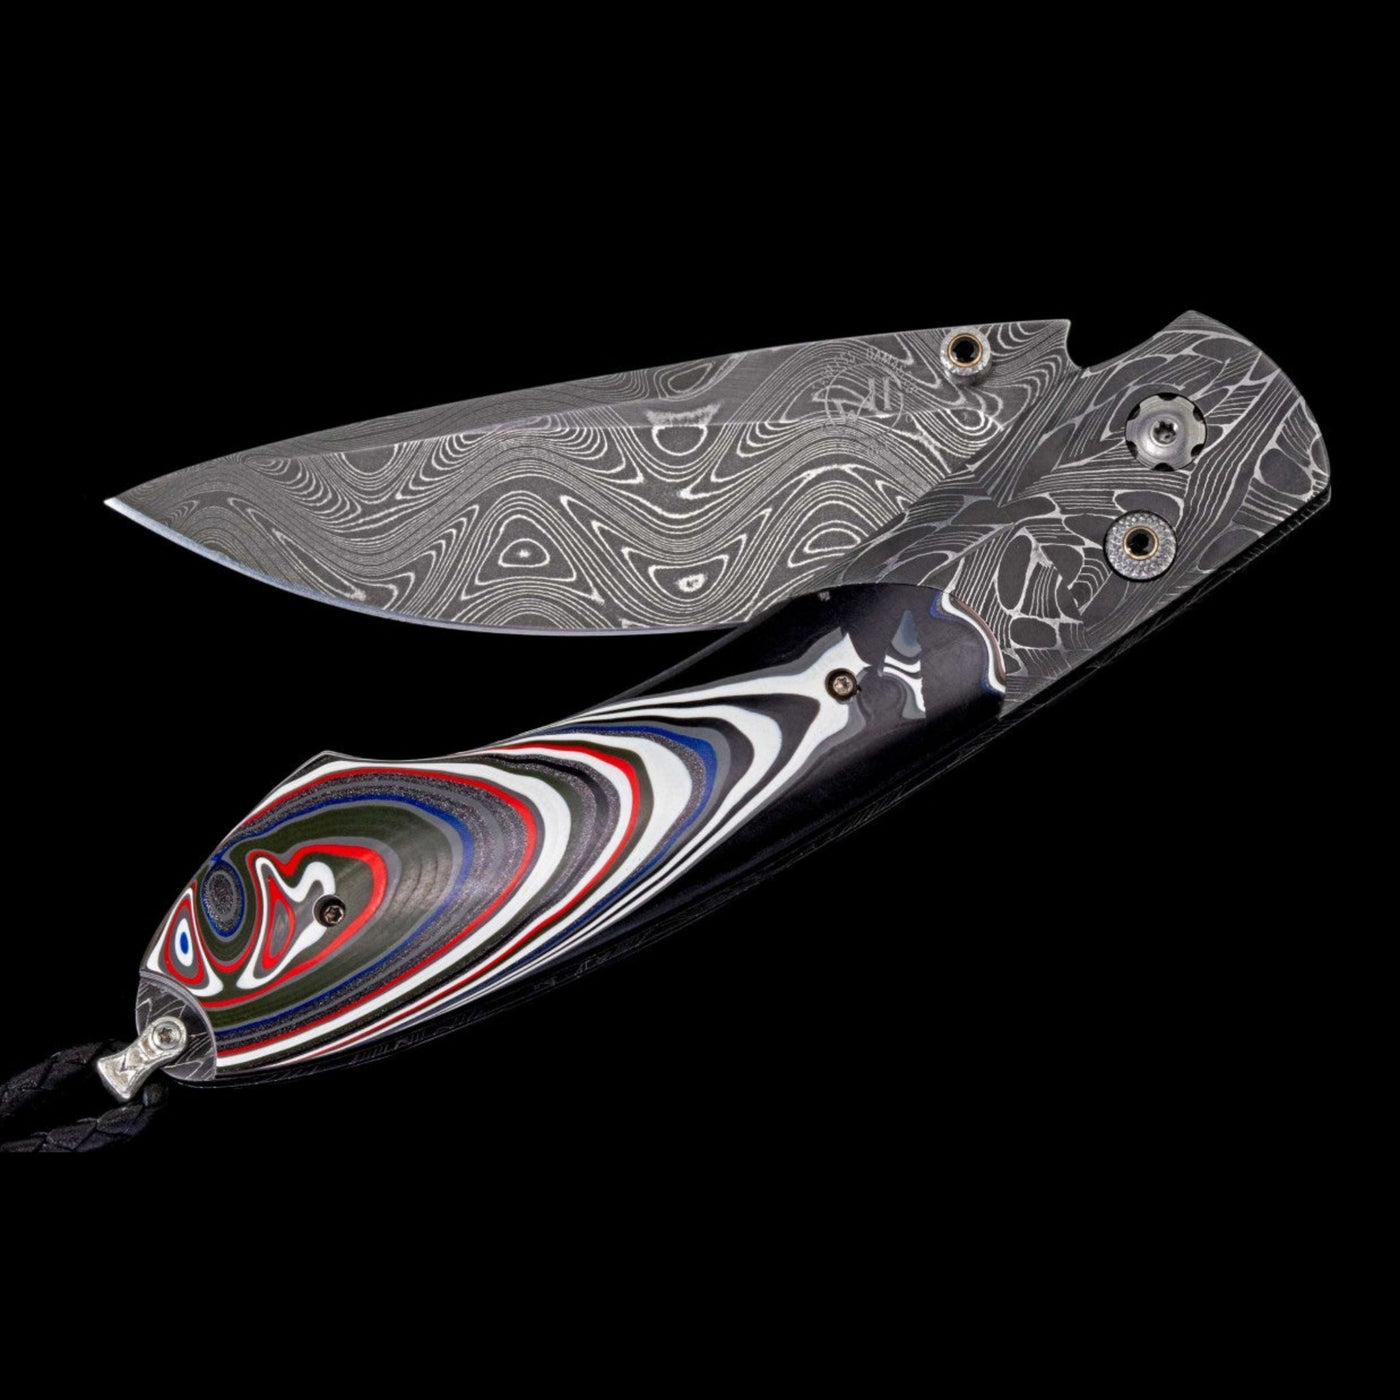 Damascus Knife Inlaid with Fordite & Spinel Gems